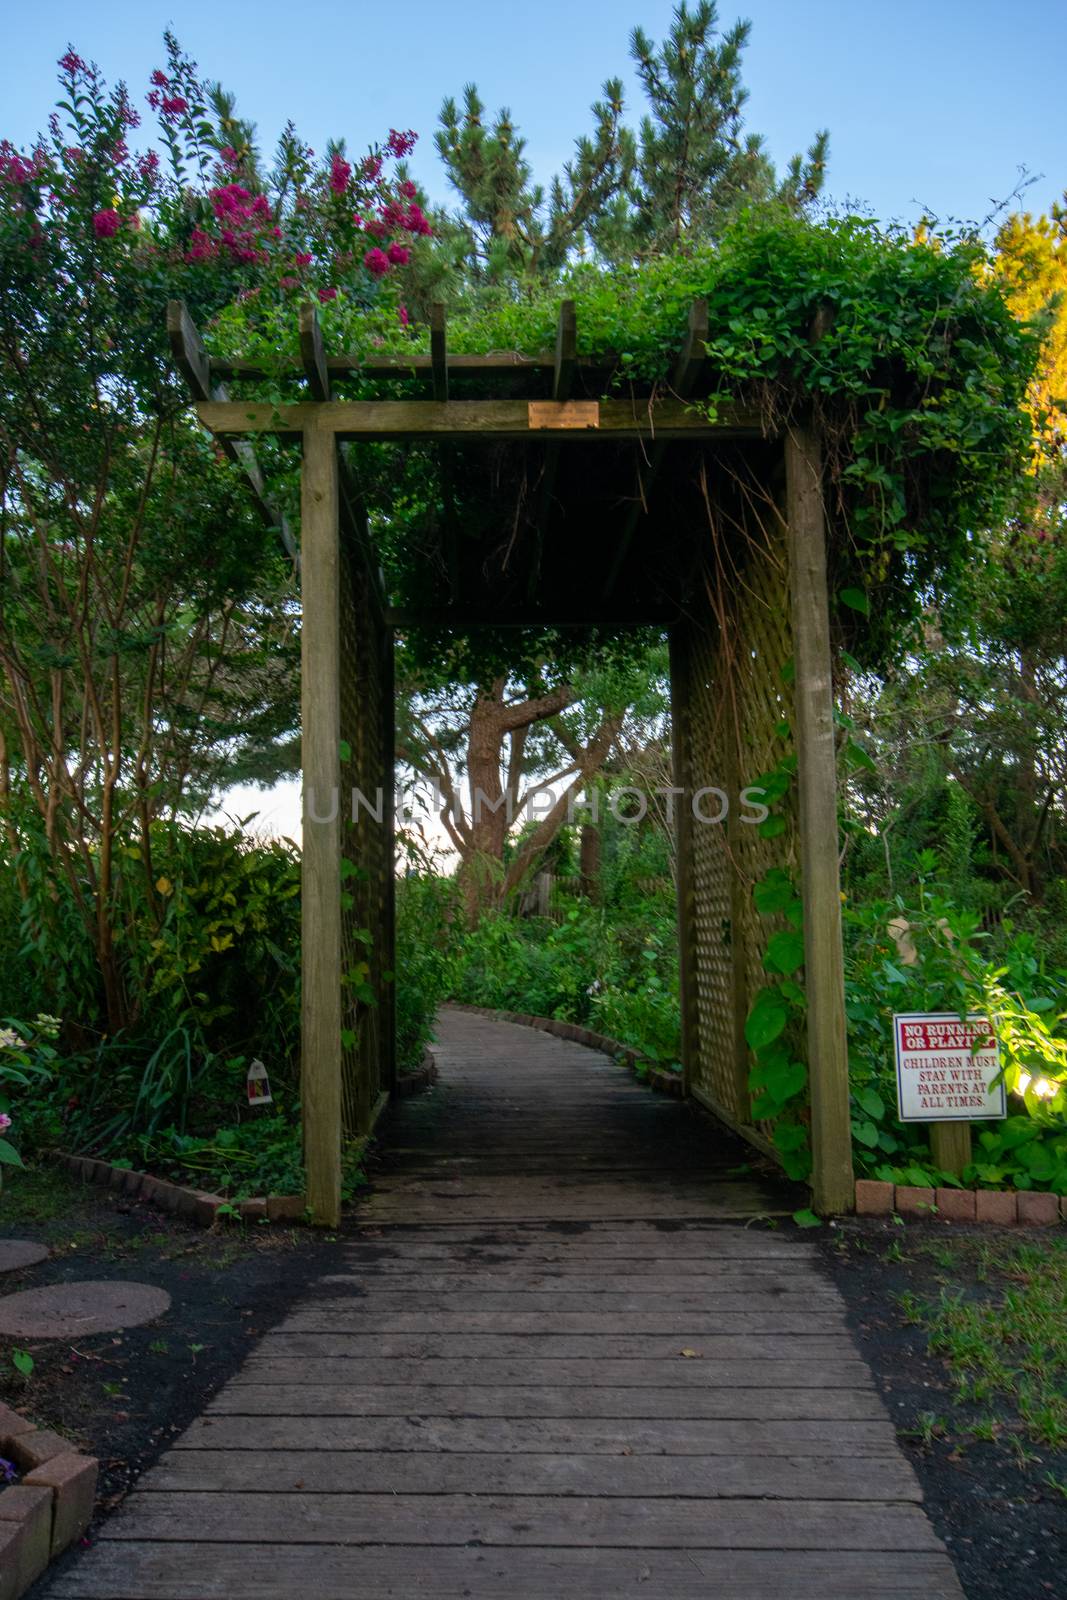 An Arch in the Lush Gardens of the Historic Hereford Lighthouse  by bju12290